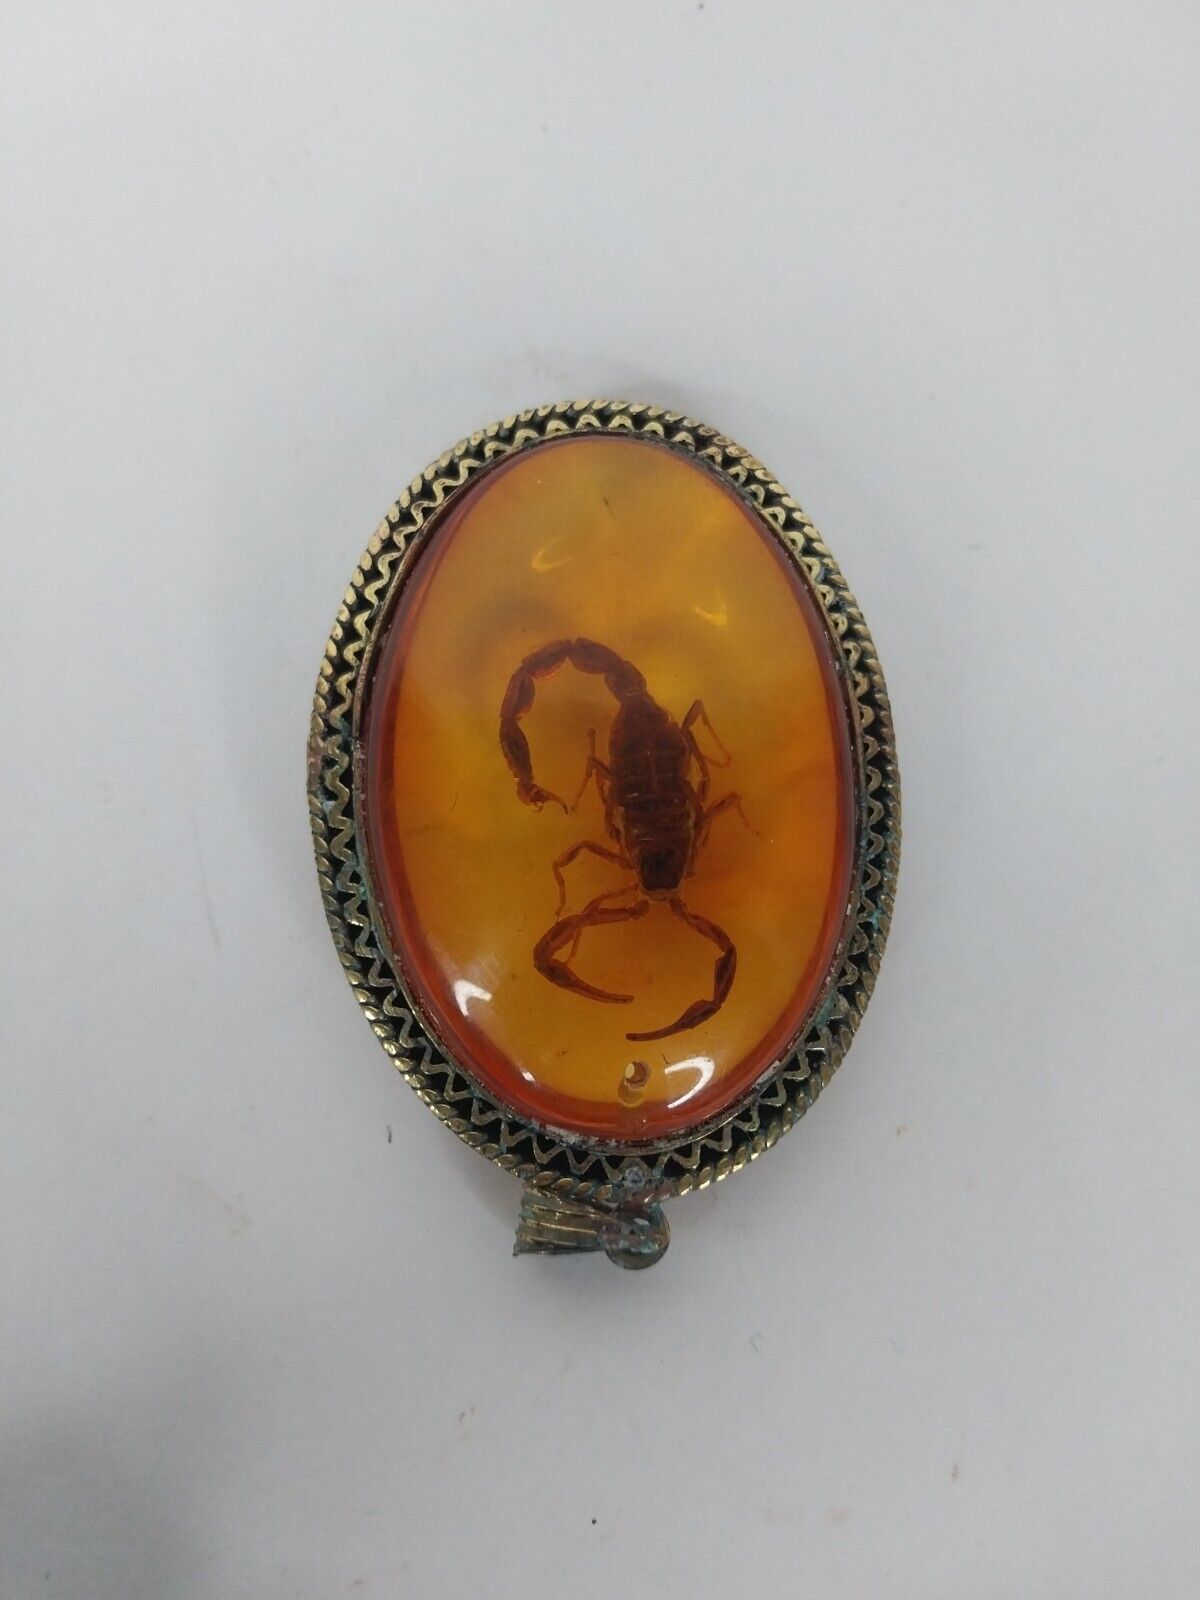 RARE ANTIQUE ANCIENT EGYPTIAN Old Scorpion Dead Mummy Amber Pendant Necklace